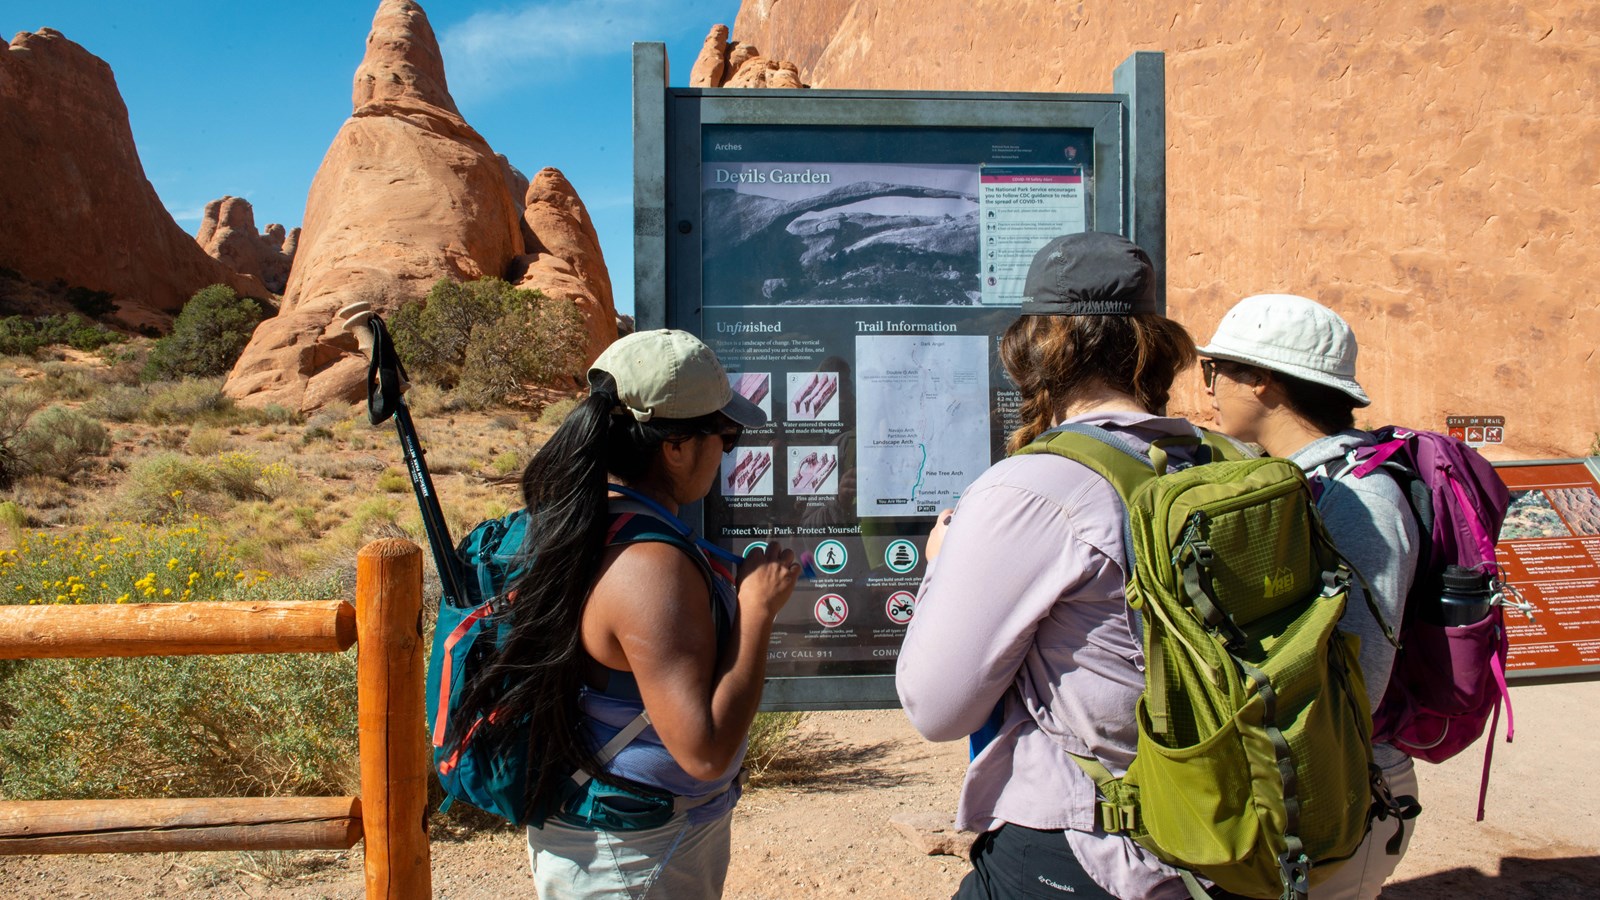 Hikers reading a trailhead sign near a fence, sandstone walls in background